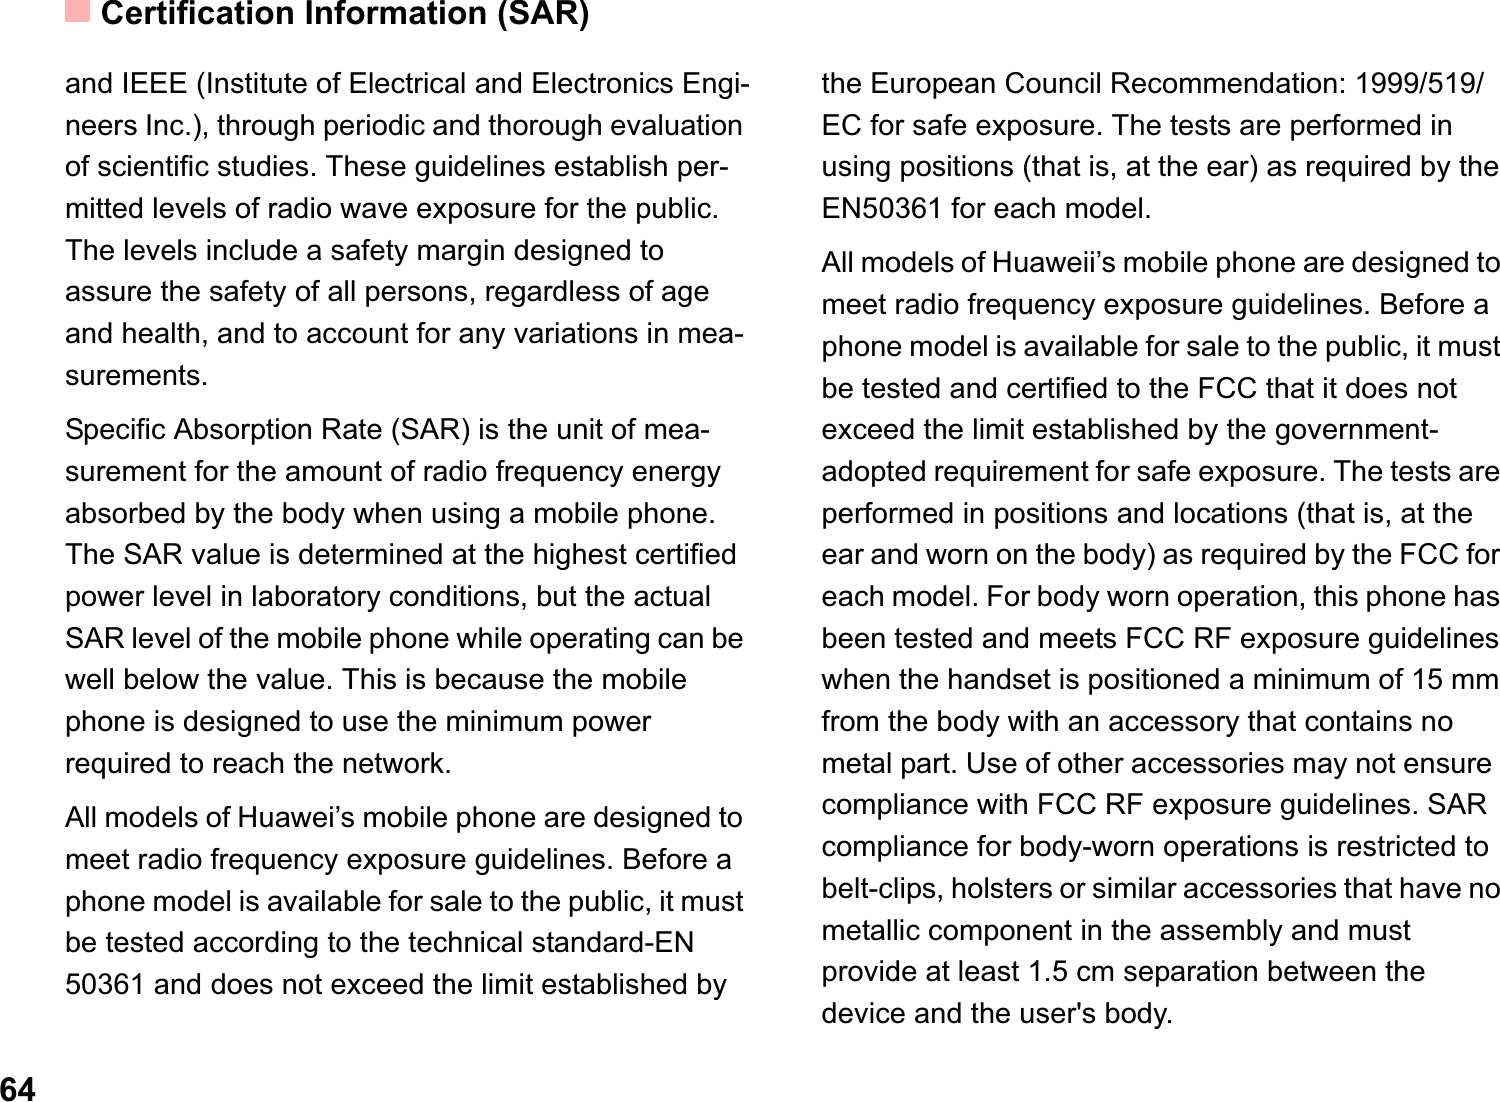 Certification Information (SAR)64and IEEE (Institute of Electrical and Electronics Engi-neers Inc.), through periodic and thorough evaluation of scientific studies. These guidelines establish per-mitted levels of radio wave exposure for the public. The levels include a safety margin designed to assure the safety of all persons, regardless of age and health, and to account for any variations in mea-surements.Specific Absorption Rate (SAR) is the unit of mea-surement for the amount of radio frequency energy absorbed by the body when using a mobile phone. The SAR value is determined at the highest certified power level in laboratory conditions, but the actual SAR level of the mobile phone while operating can be well below the value. This is because the mobile phone is designed to use the minimum power required to reach the network.All models of Huawei’s mobile phone are designed to meet radio frequency exposure guidelines. Before a phone model is available for sale to the public, it must be tested according to the technical standard-EN 50361 and does not exceed the limit established by the European Council Recommendation: 1999/519/EC for safe exposure. The tests are performed in using positions (that is, at the ear) as required by the EN50361 for each model.All models of Huaweii’s mobile phone are designed to meet radio frequency exposure guidelines. Before a phone model is available for sale to the public, it must be tested and certified to the FCC that it does not exceed the limit established by the government-adopted requirement for safe exposure. The tests are performed in positions and locations (that is, at the ear and worn on the body) as required by the FCC for each model. For body worn operation, this phone has been tested and meets FCC RF exposure guidelines when the handset is positioned a minimum of 15 mm from the body with an accessory that contains no metal part. Use of other accessories may not ensure  compliance with FCC RF exposure guidelines. SAR compliance for body-worn operations is restricted to belt-clips, holsters or similar accessories that have no metallic component in the assembly and must provide at least 1.5 cm separation between the device and the user&apos;s body.